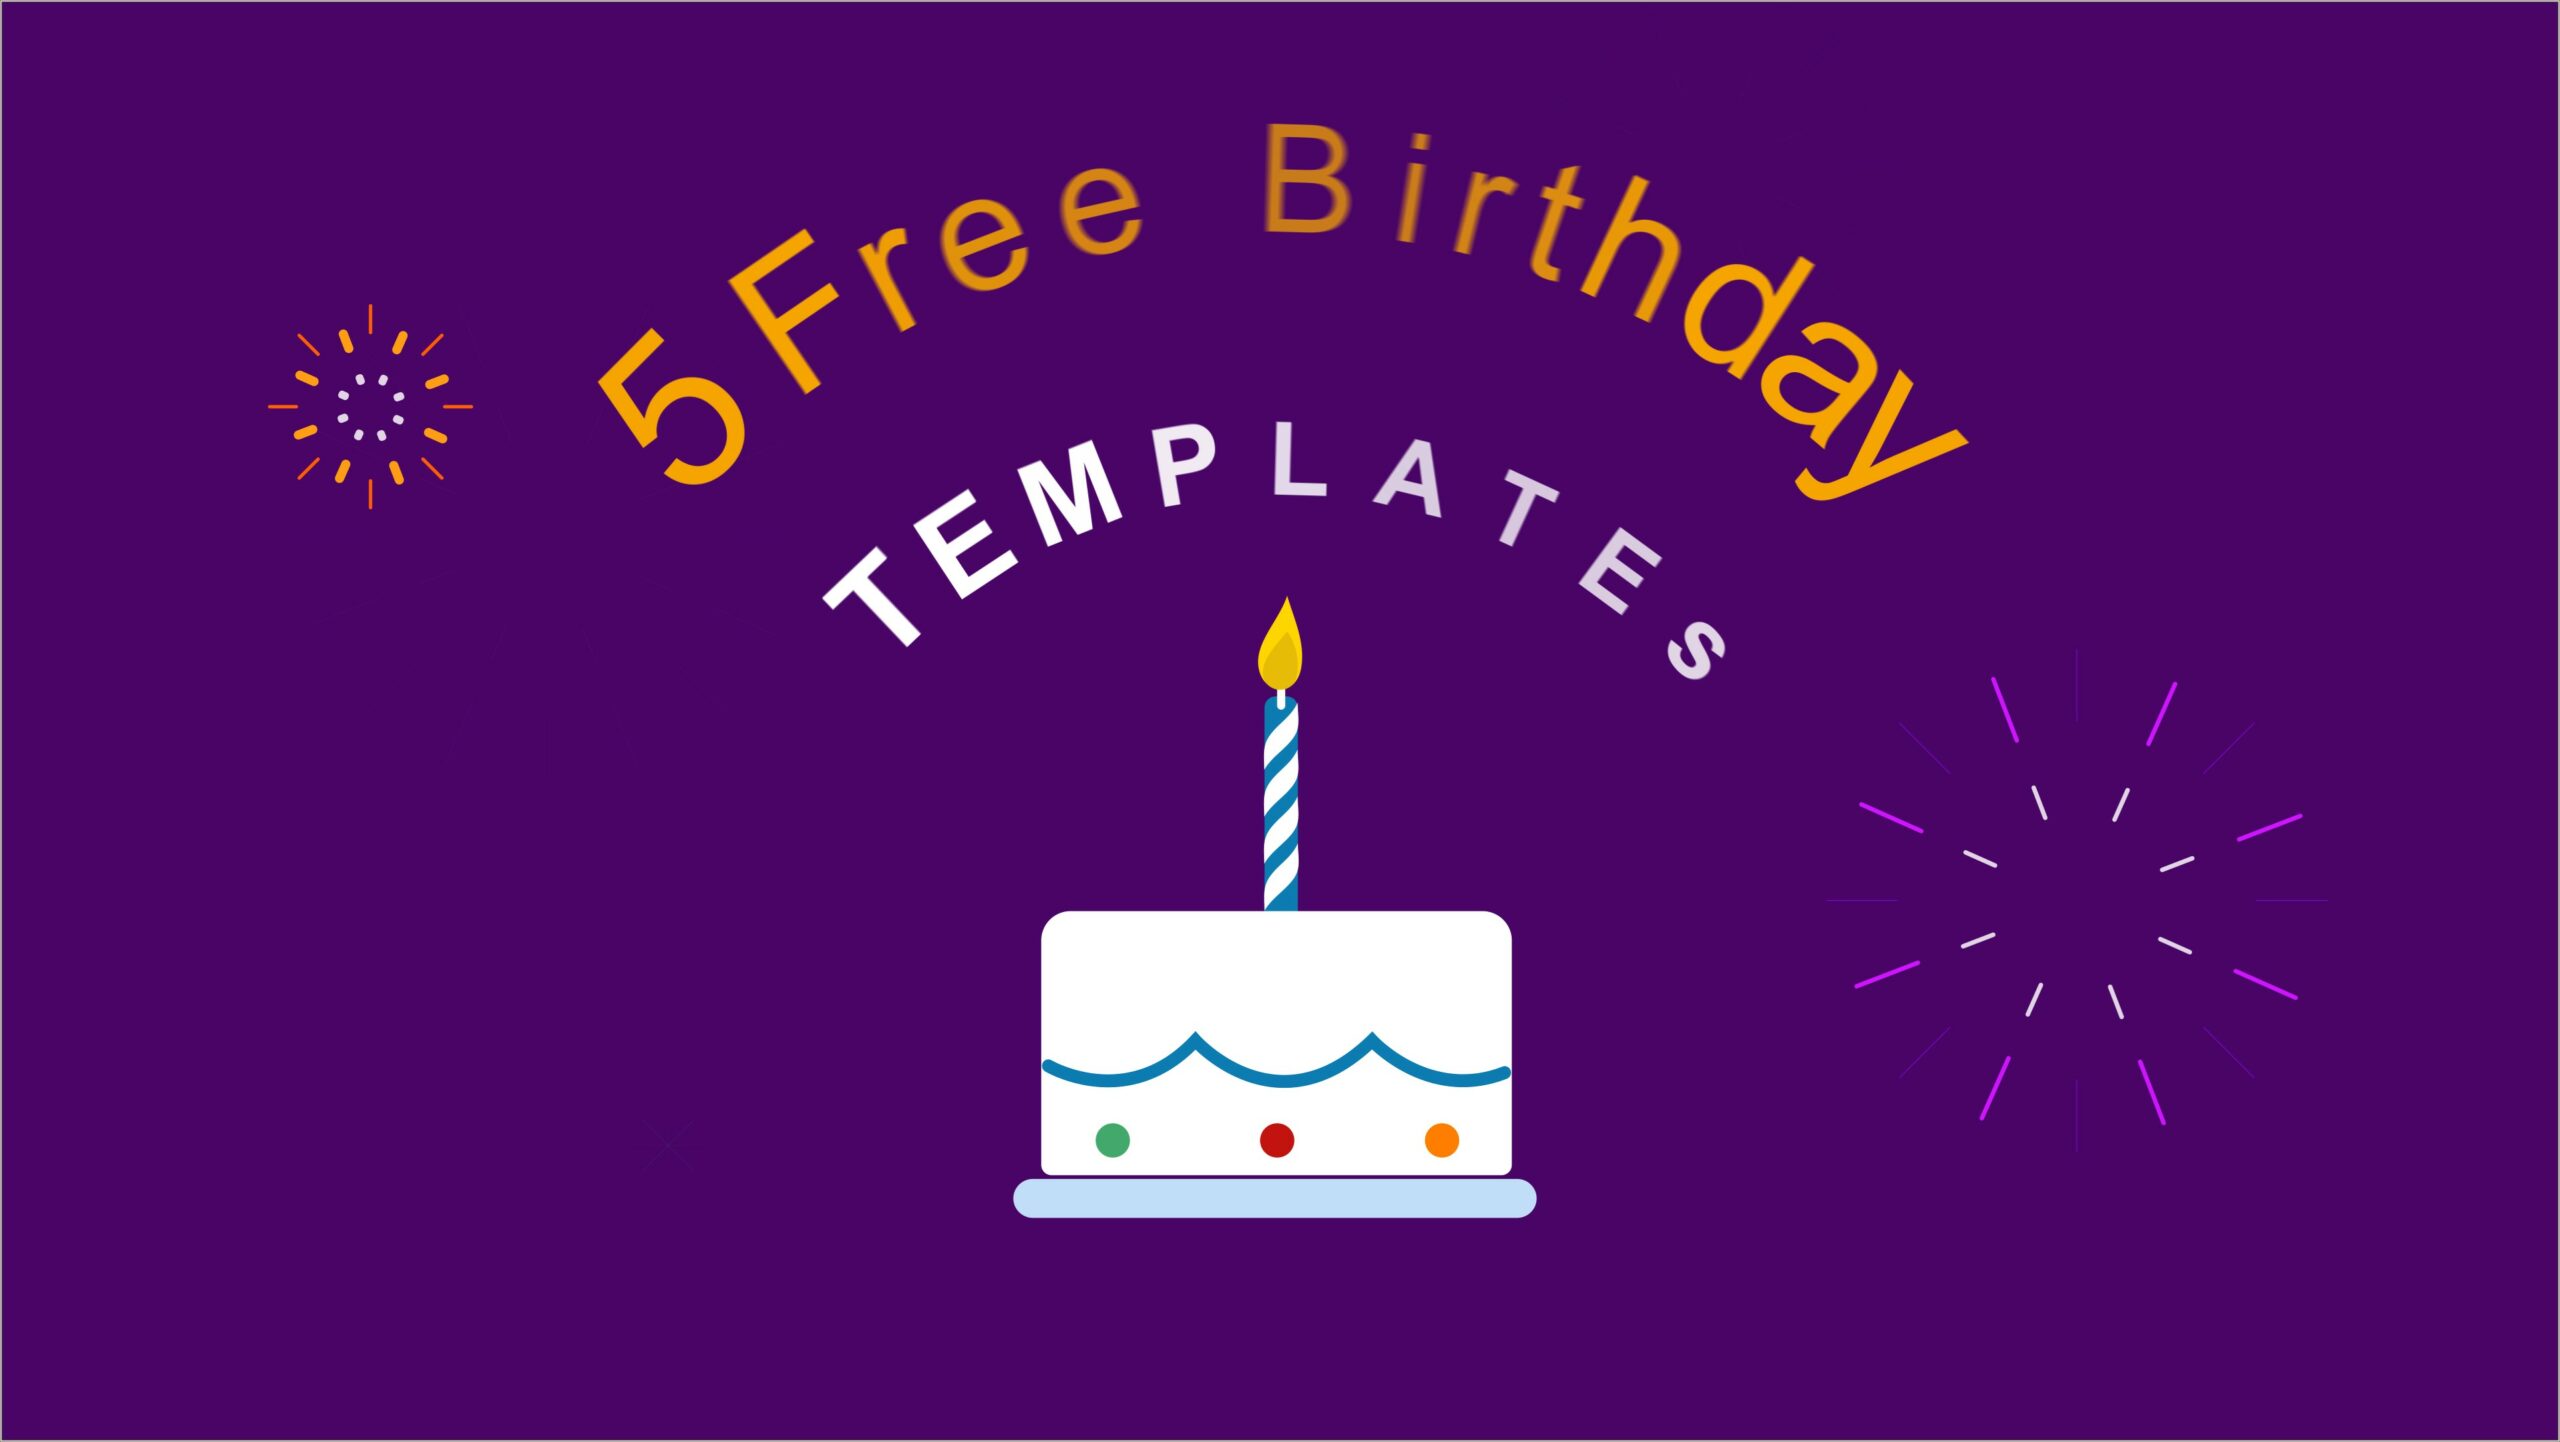 Happy Birthday Template After Effects Free Download